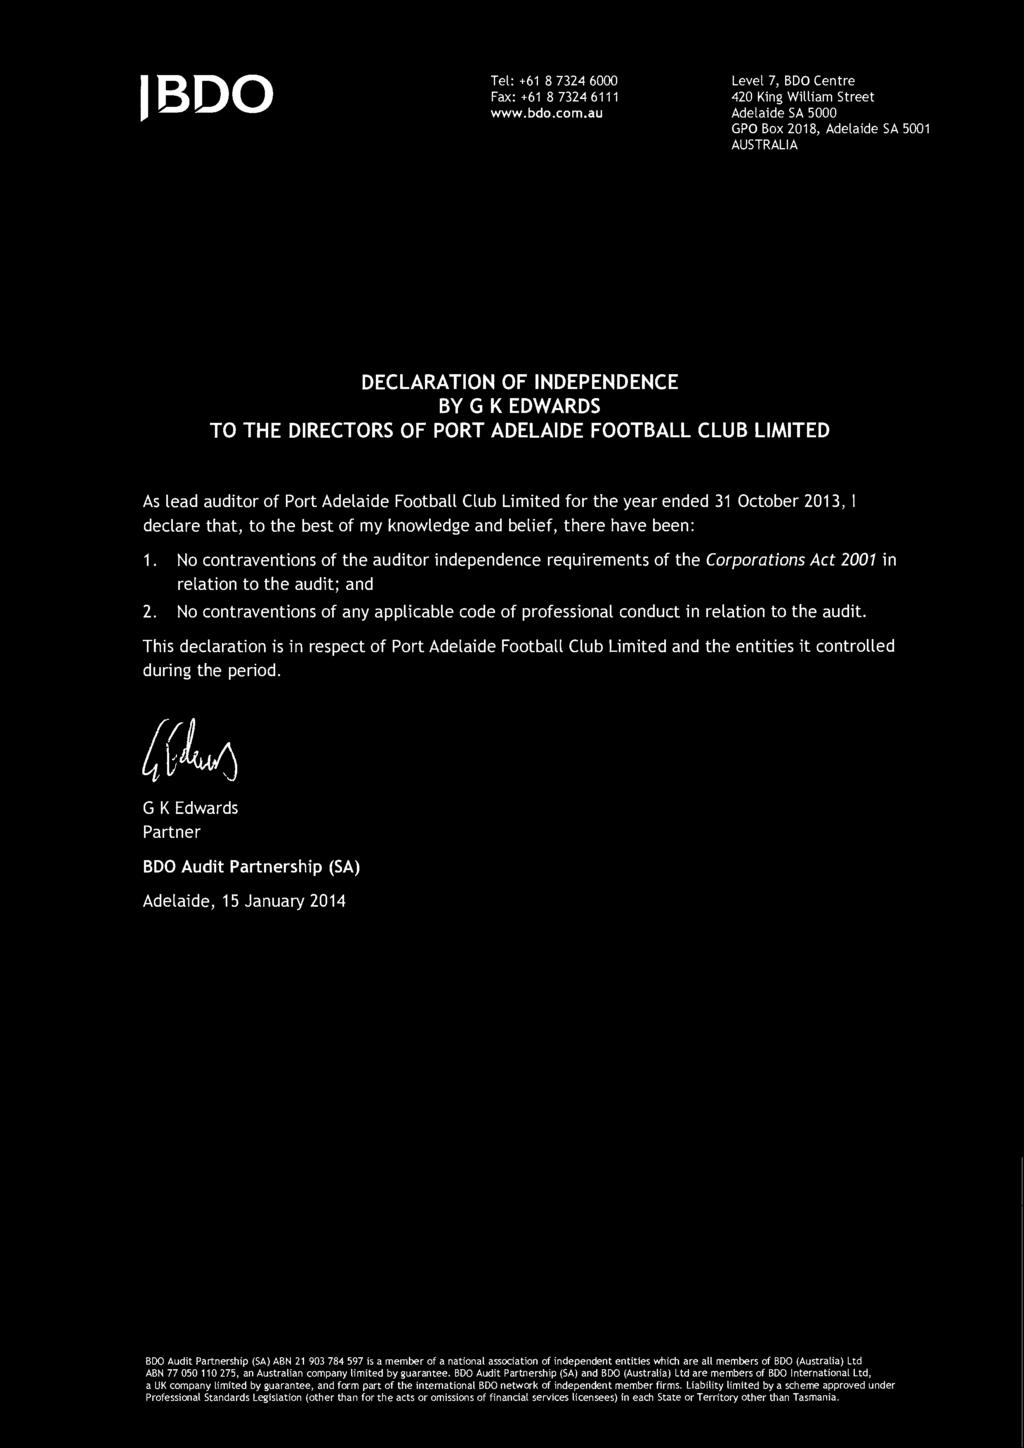 LIMITED As lead auditor of Port Adelaide Football Club Limited for the year ended 31 October 2013, I declare that, to the best of my knowledge and belief, there have been: 1.